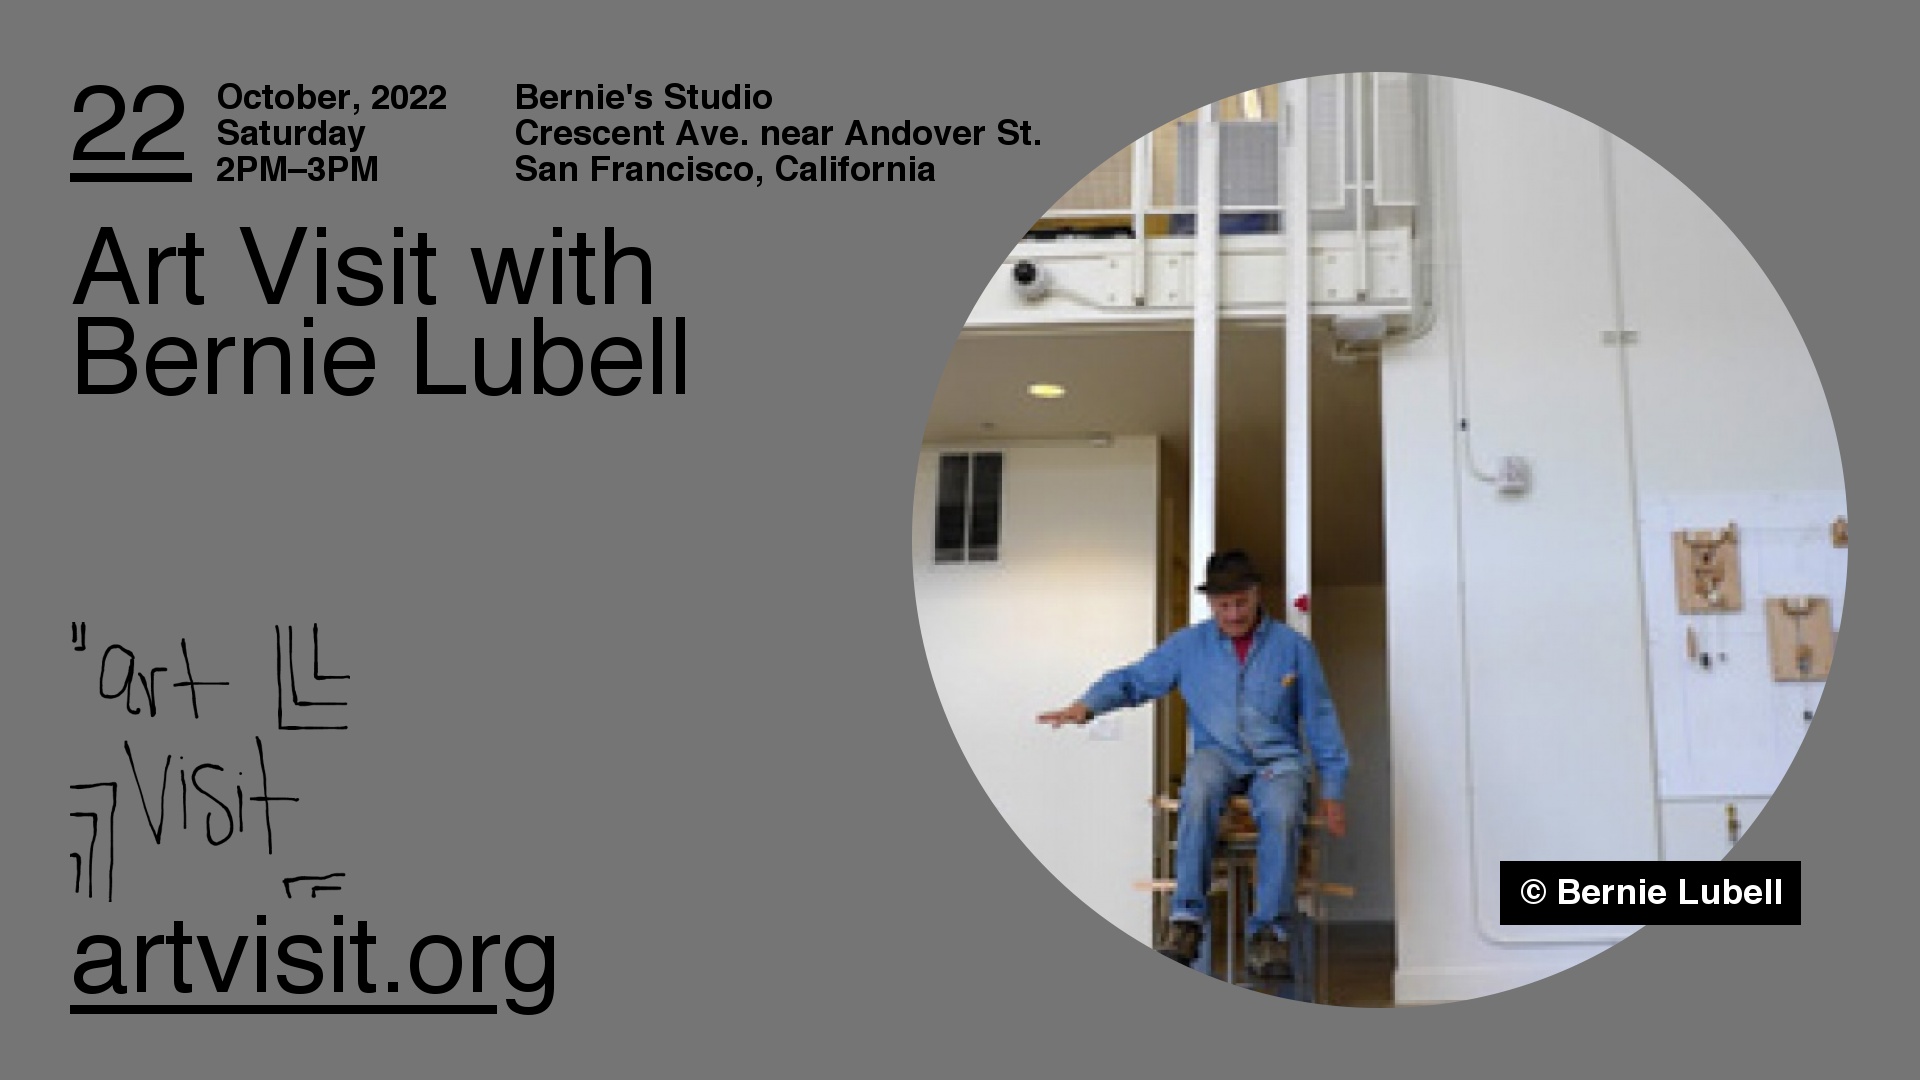 Art Visit with Bernie Lubell